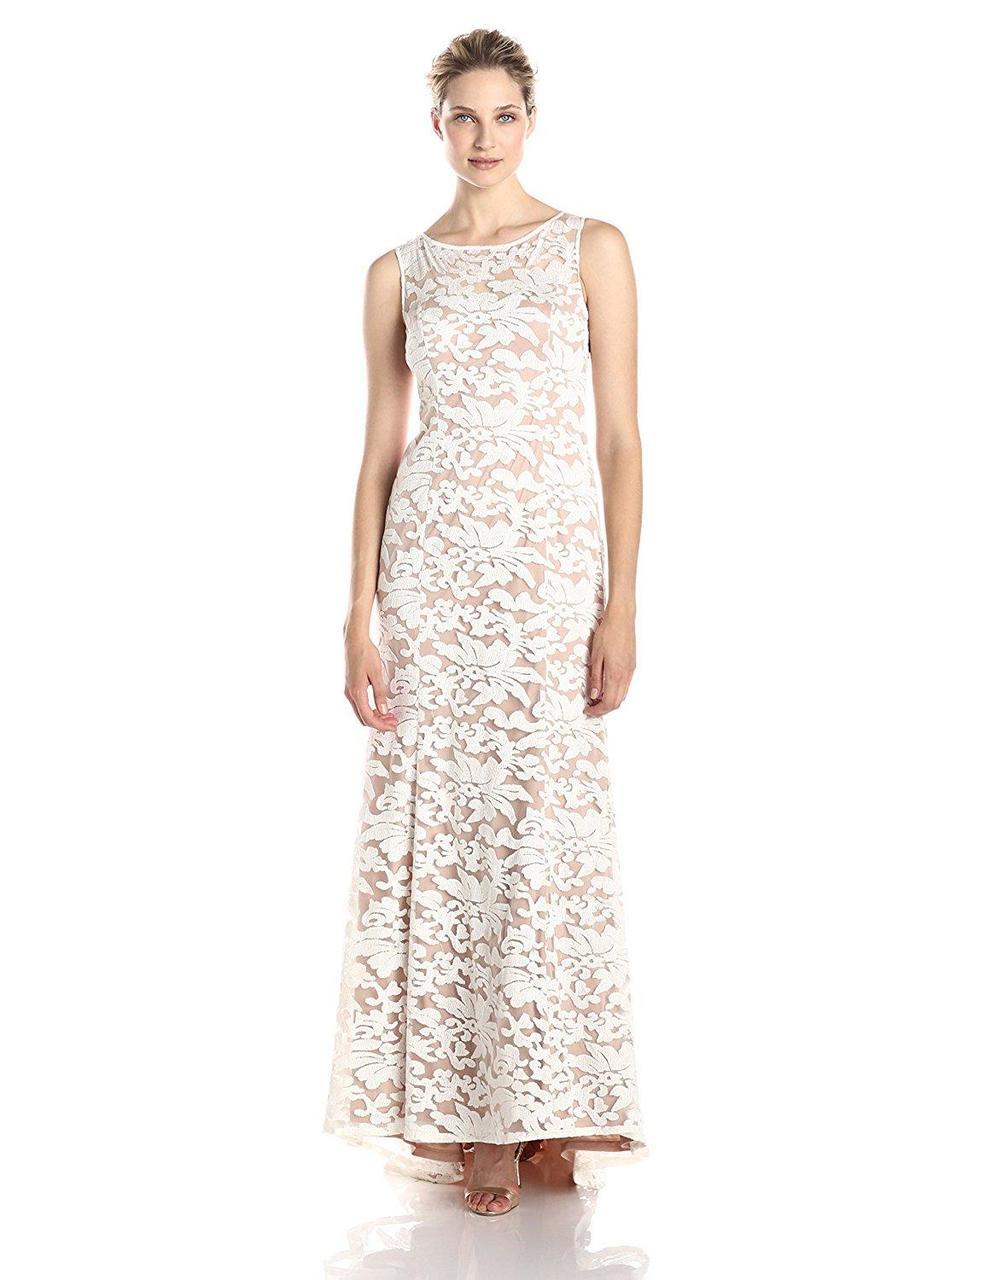 Adrianna Papell - 91906310 Embroidered Sleeveless Evening Gown in White and Neutral